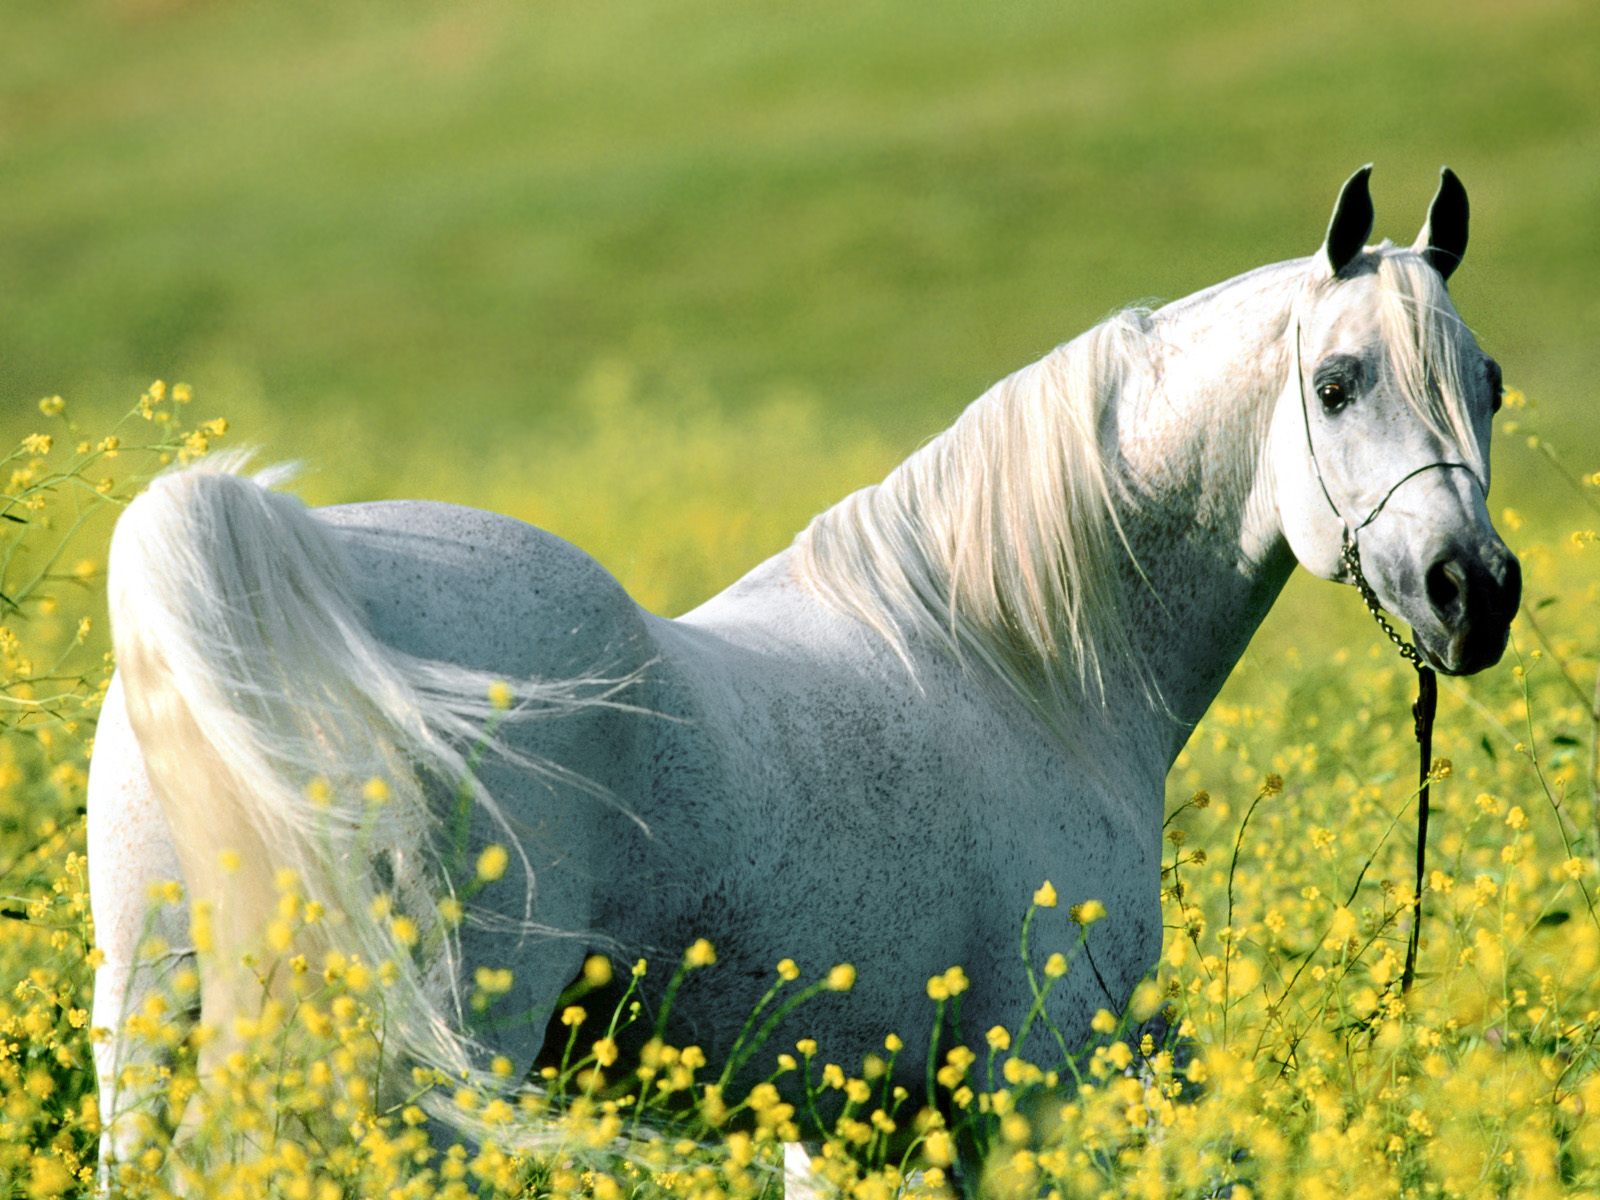 Wallpaper of a white horse in a field full of yellow flowers